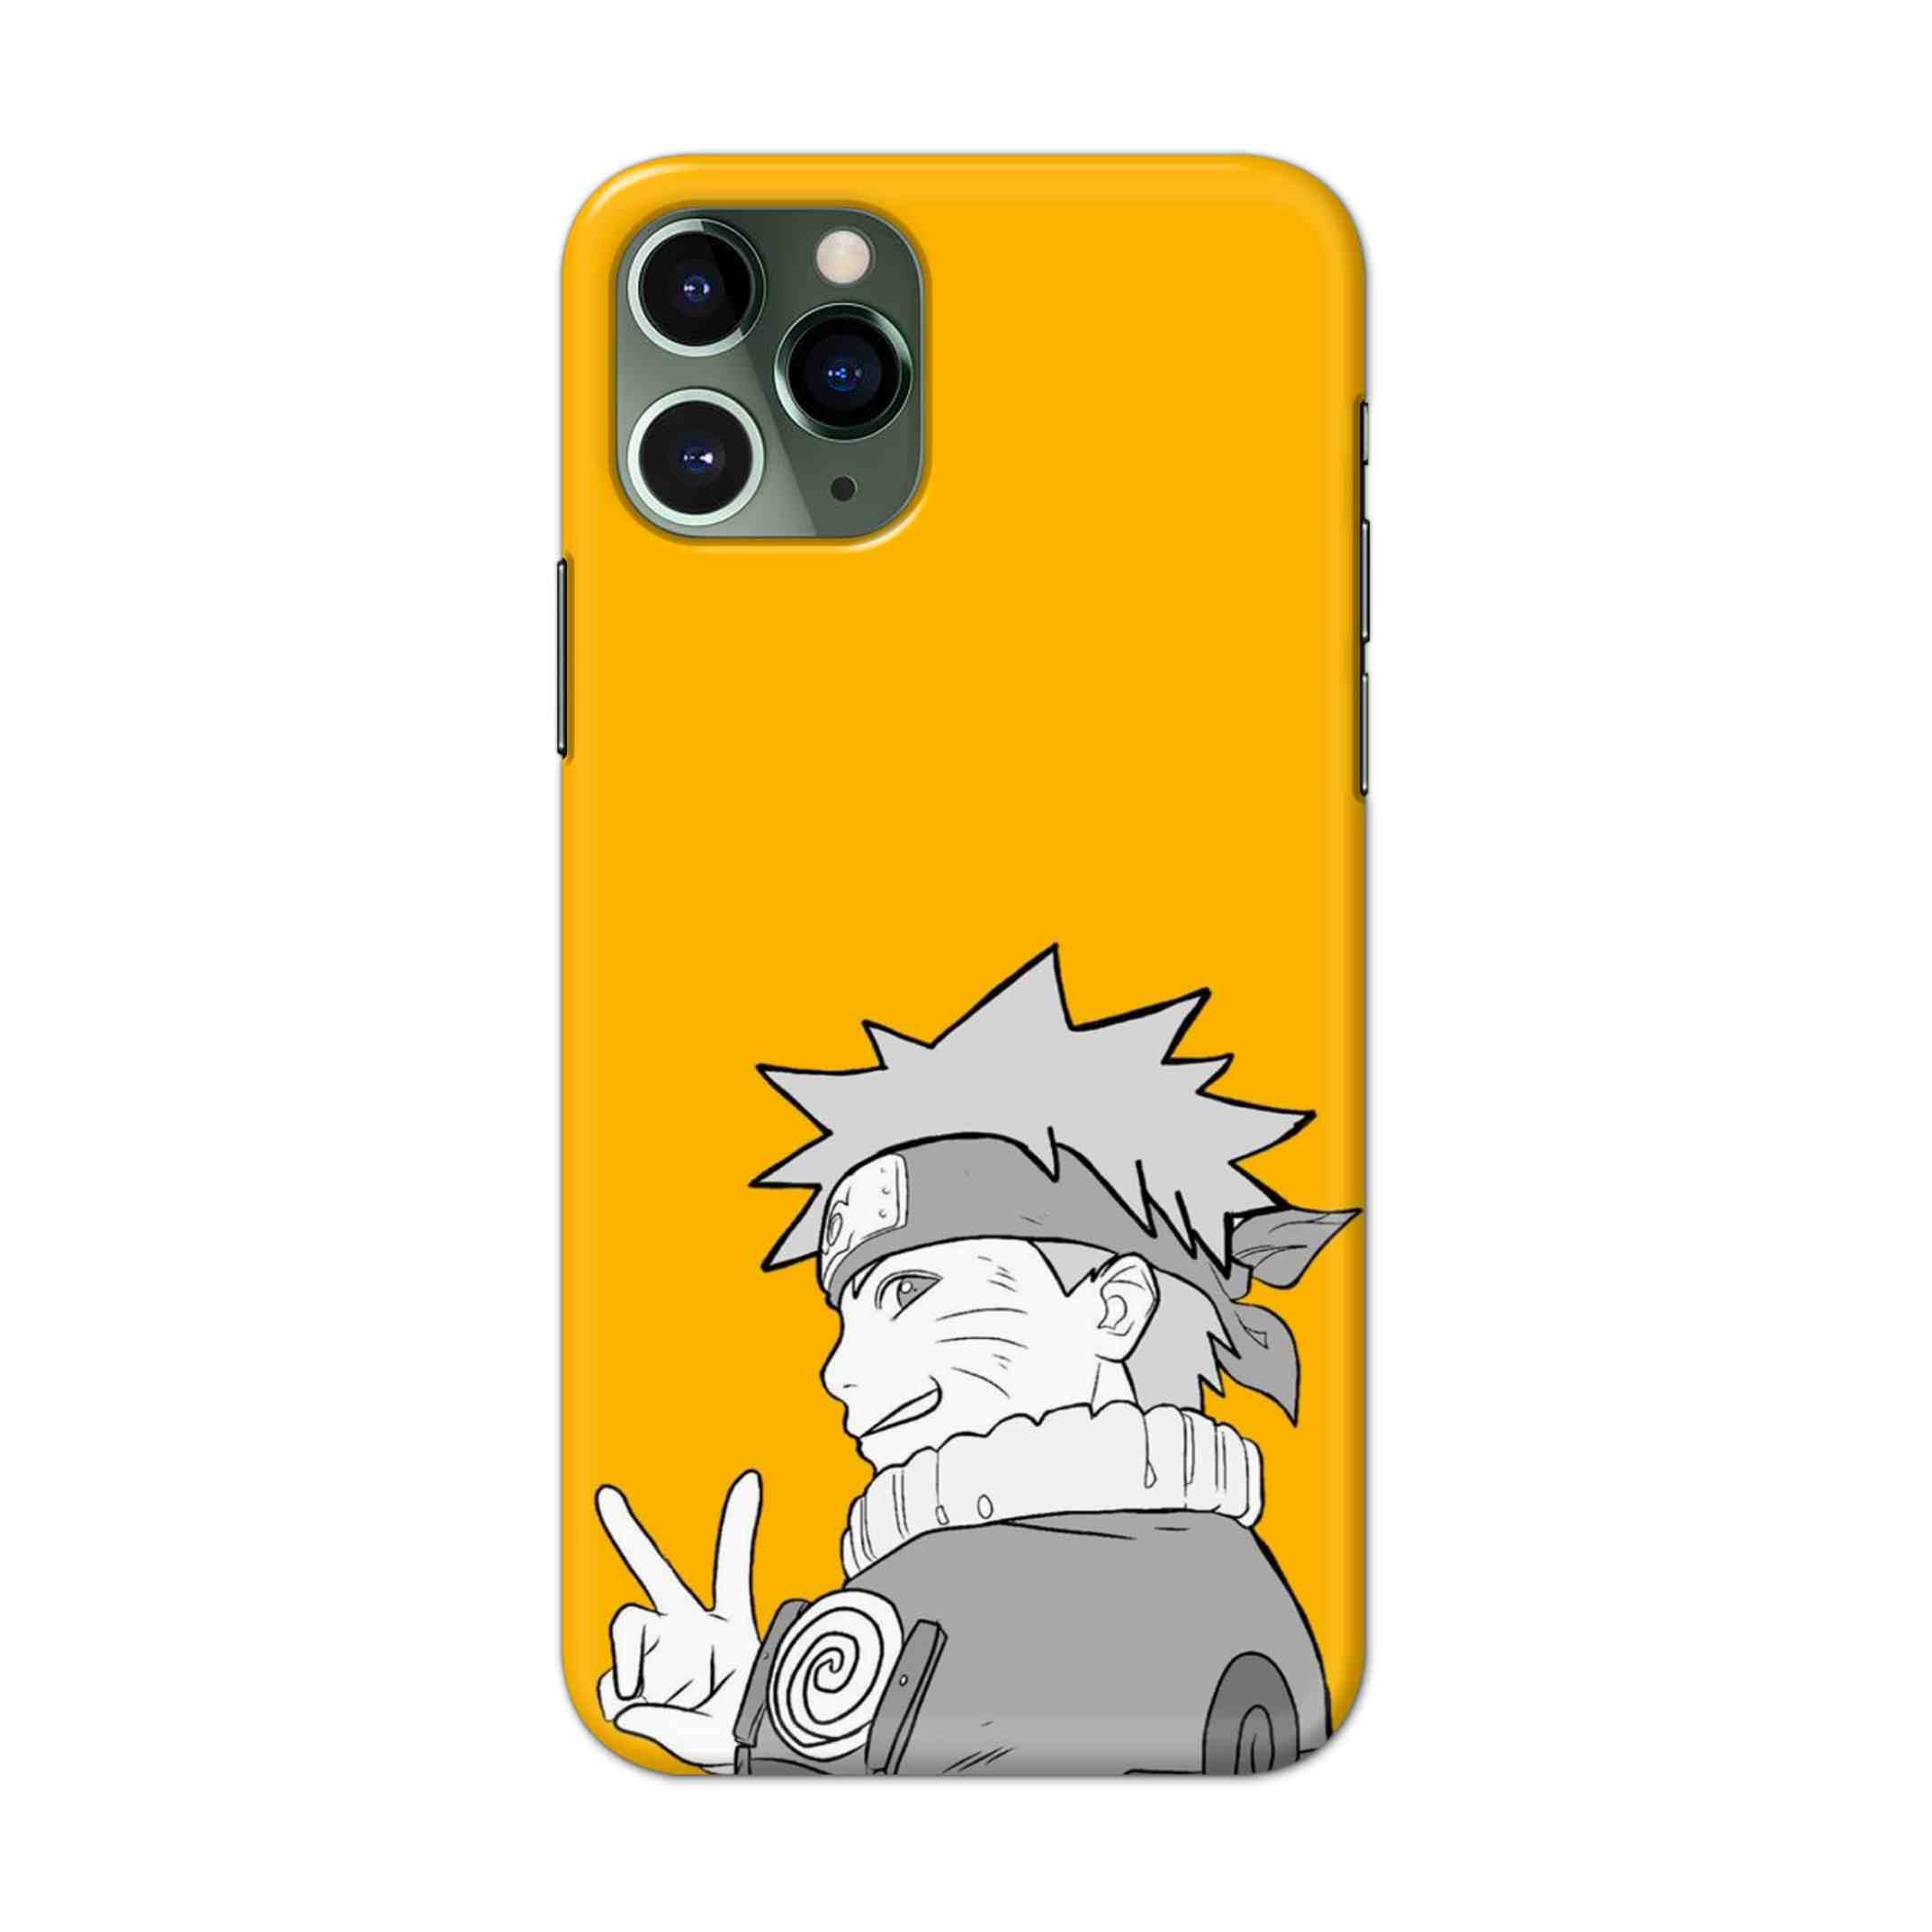 Buy White Naruto Hard Back Mobile Phone Case/Cover For iPhone 11 Pro Online